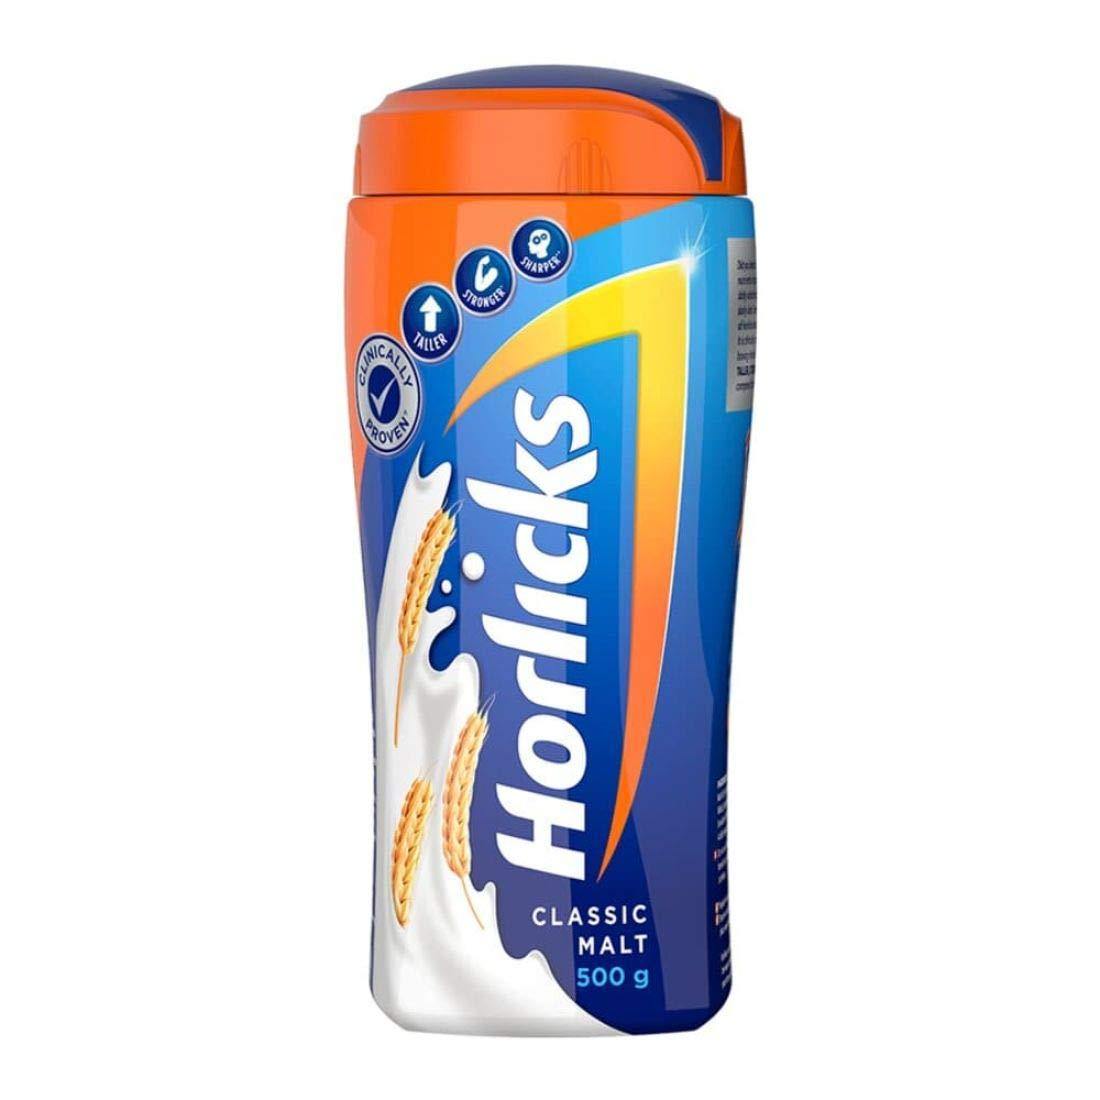 Horlicks Classic Mart 500g - Cartly - Indian Grocery Store